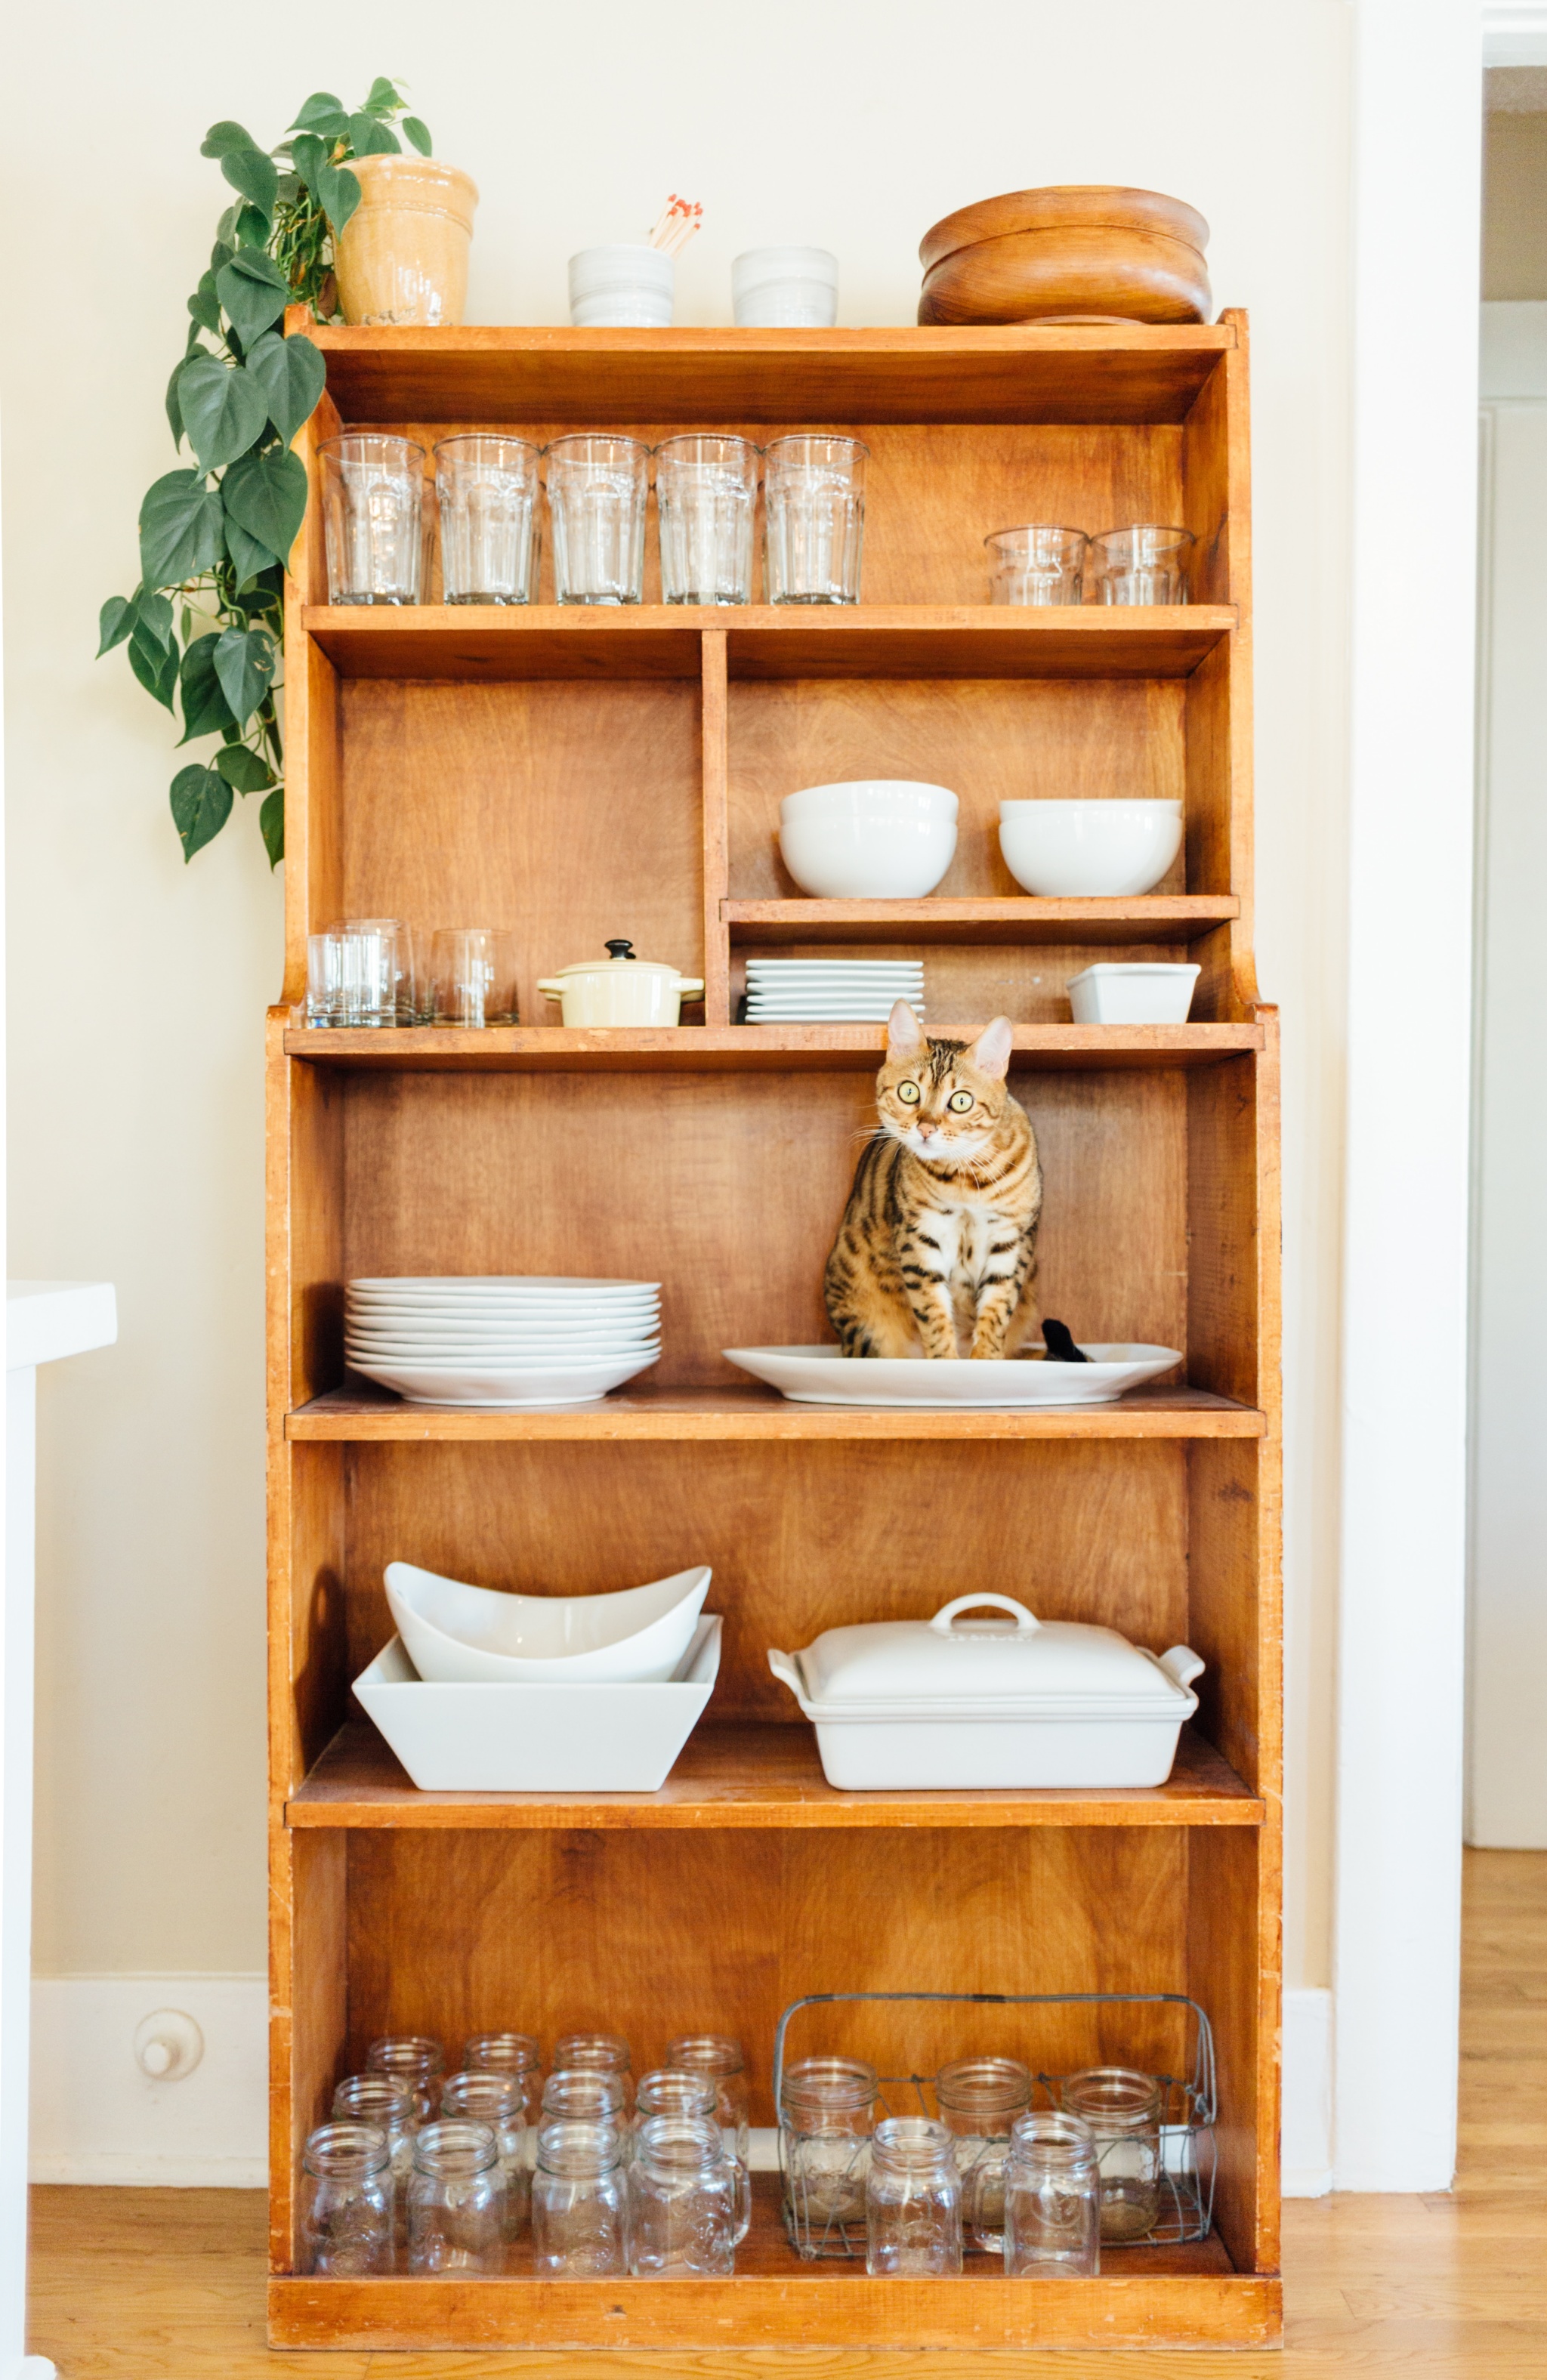 how to style open kitchen shelves